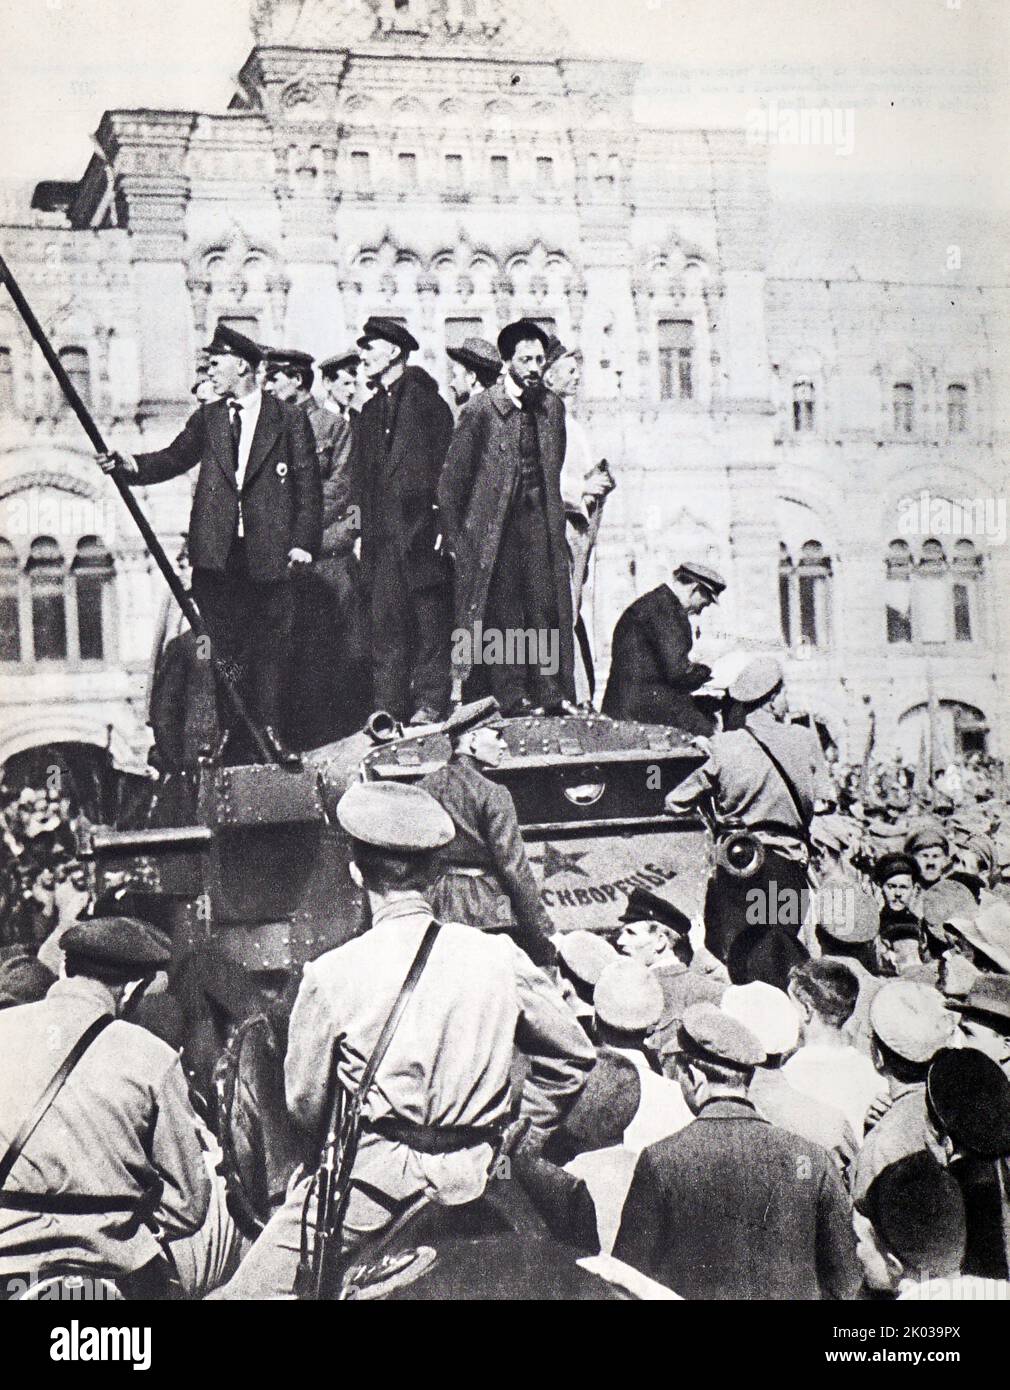 M. Sverdlov speaking from the armoured car Red Zamoskvorechye on Red Square, Moscow, May 1. 1918. Photo by A. Dorn. He was a Bolshevik party administrator and chairman of the All-Russian Central Executive Committee from 1917 to 1919. He is sometimes regarded as the first head of state of the Soviet Union although it was not established until 1922, three years after his death. Stock Photo